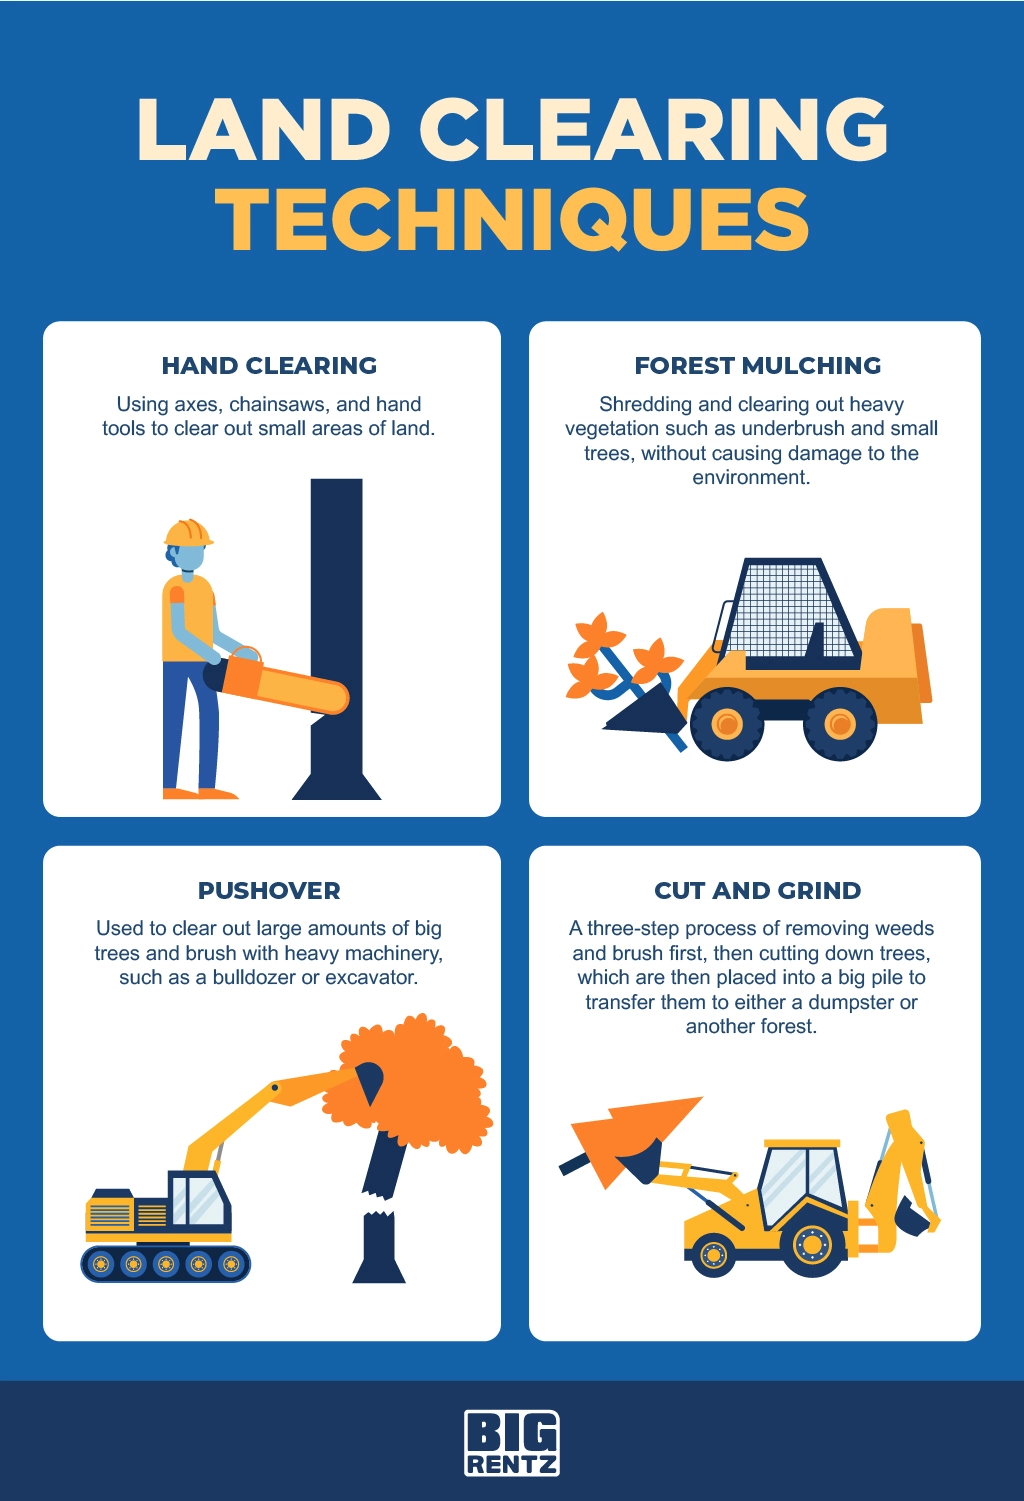 Manual Land Clearing vs. Machinery: The Human Touch